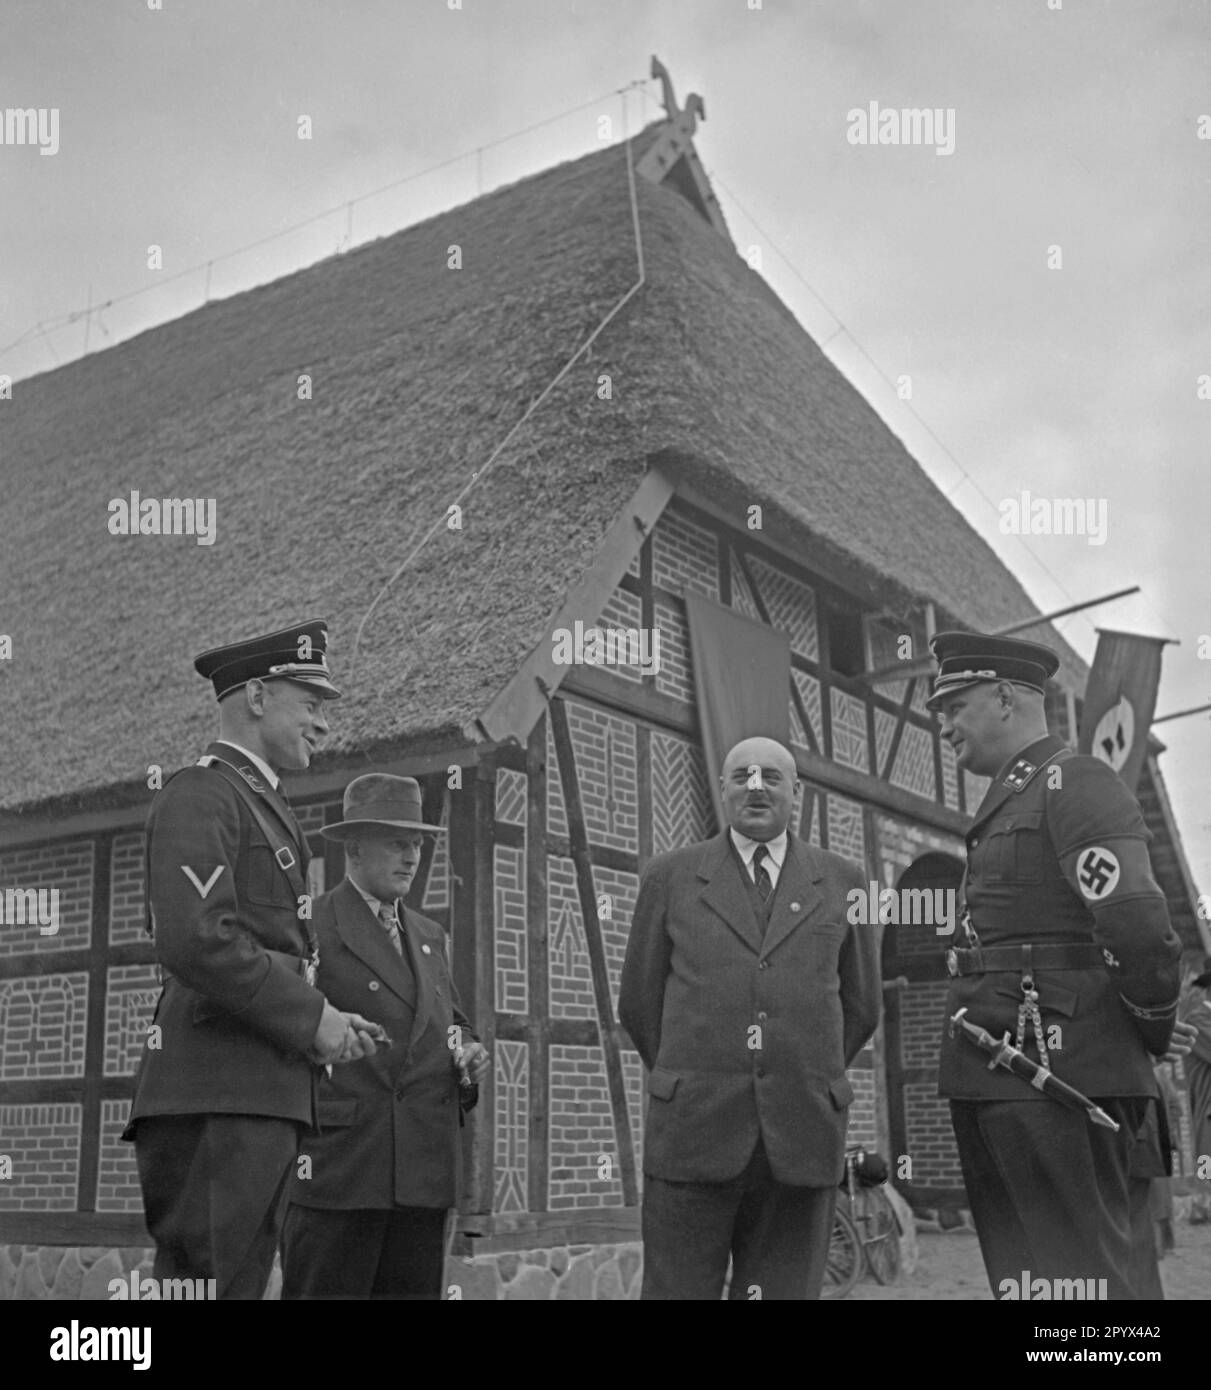 Photo of a group of Nazi farmer functionaries and SS men in uniform (on the left, an SS attack-man, on the right, an SS Sturmbannfuehrer) in front of the Agricultural Museum at the Landtagsplatz in Hoesseringen at Suderburg in the Lueneburg Heath. The occasion was the inauguration of the Landtagsplatz by the National Socialists on 28 June, 1936. At the entrance of the farmer's house (Low German aisled house with thatched roof and gable ornamentation, horseheads) meet farmers' representatives (some in SA uniforms) and bystanders. Swastika flags are hanging on the gable. Stock Photo